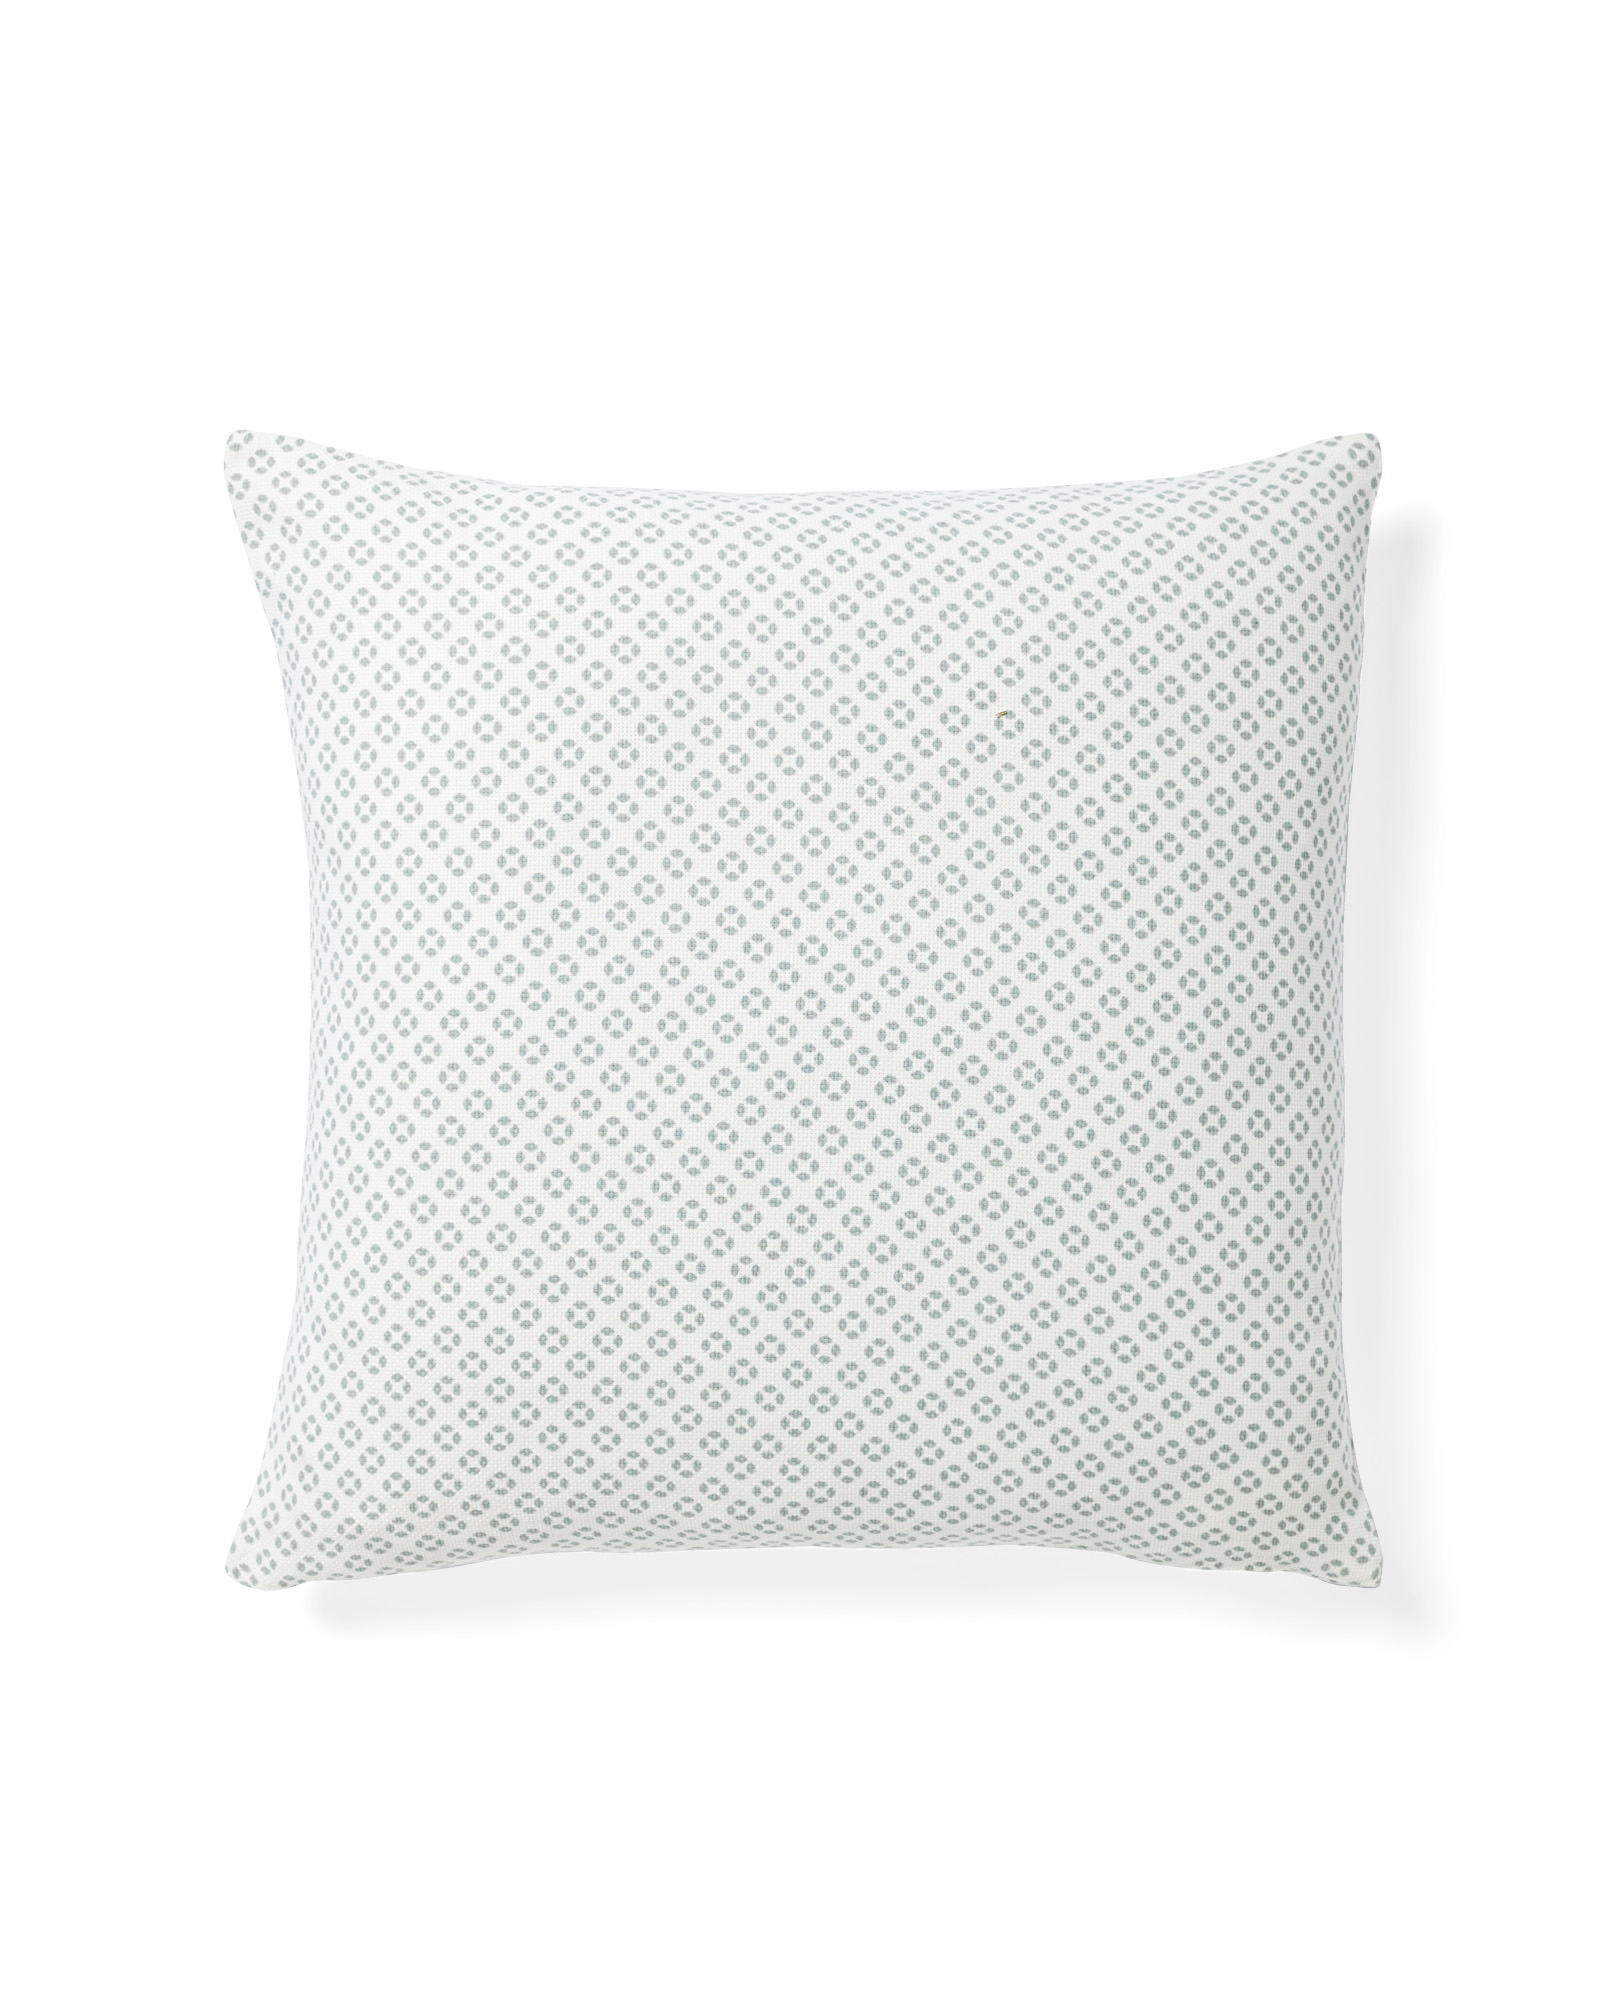 Cut Circle Outdoor Pillow Cover - Image 0